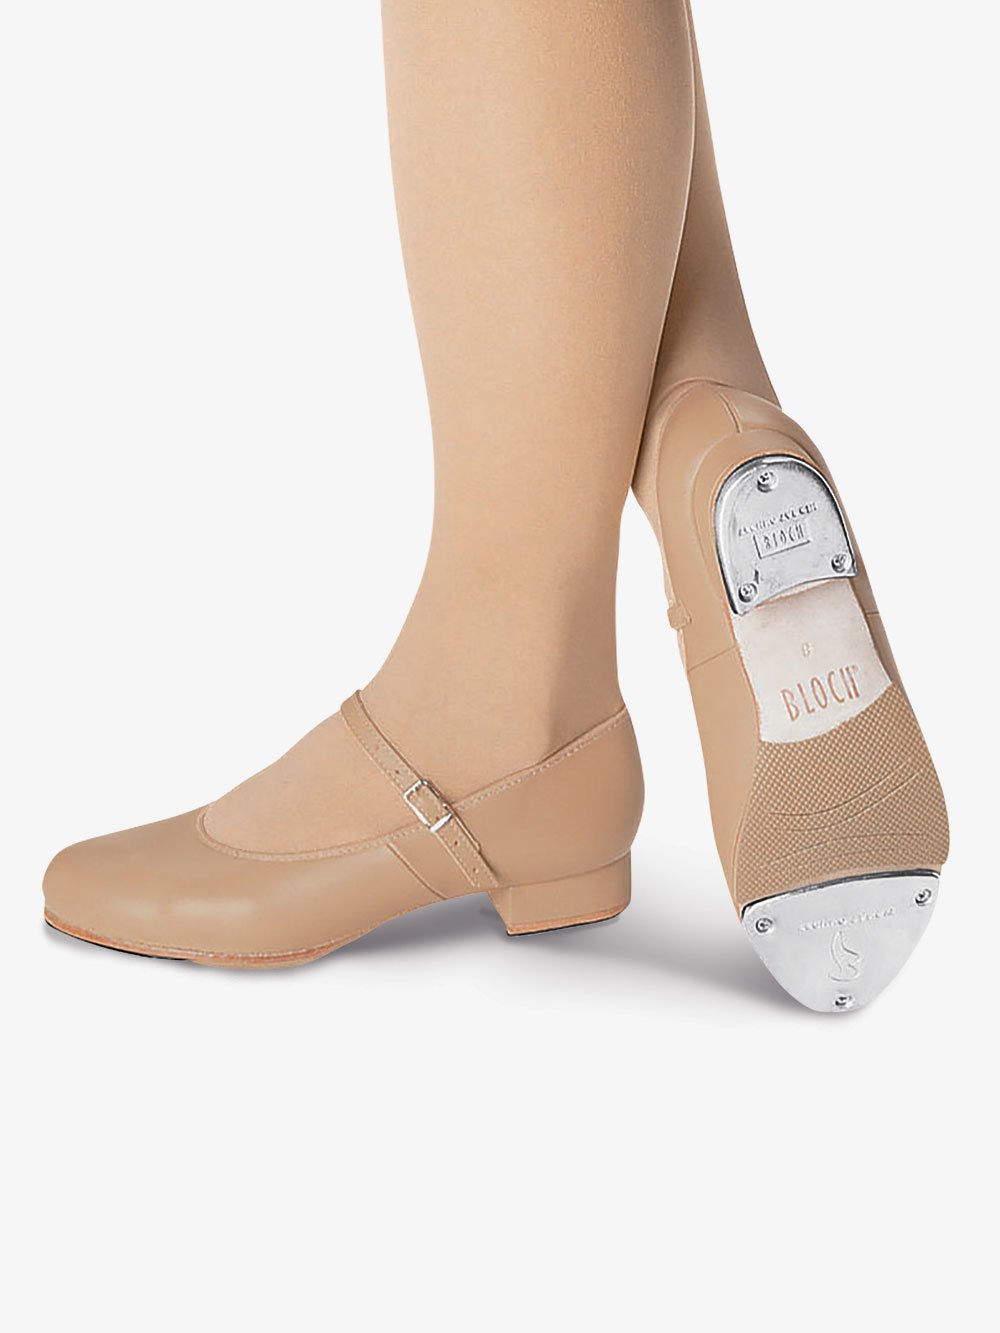 Womens "Tap-On" Buckle Tap Shoes - Tap Shoes | Bloch S0302L |  DiscountDance.com